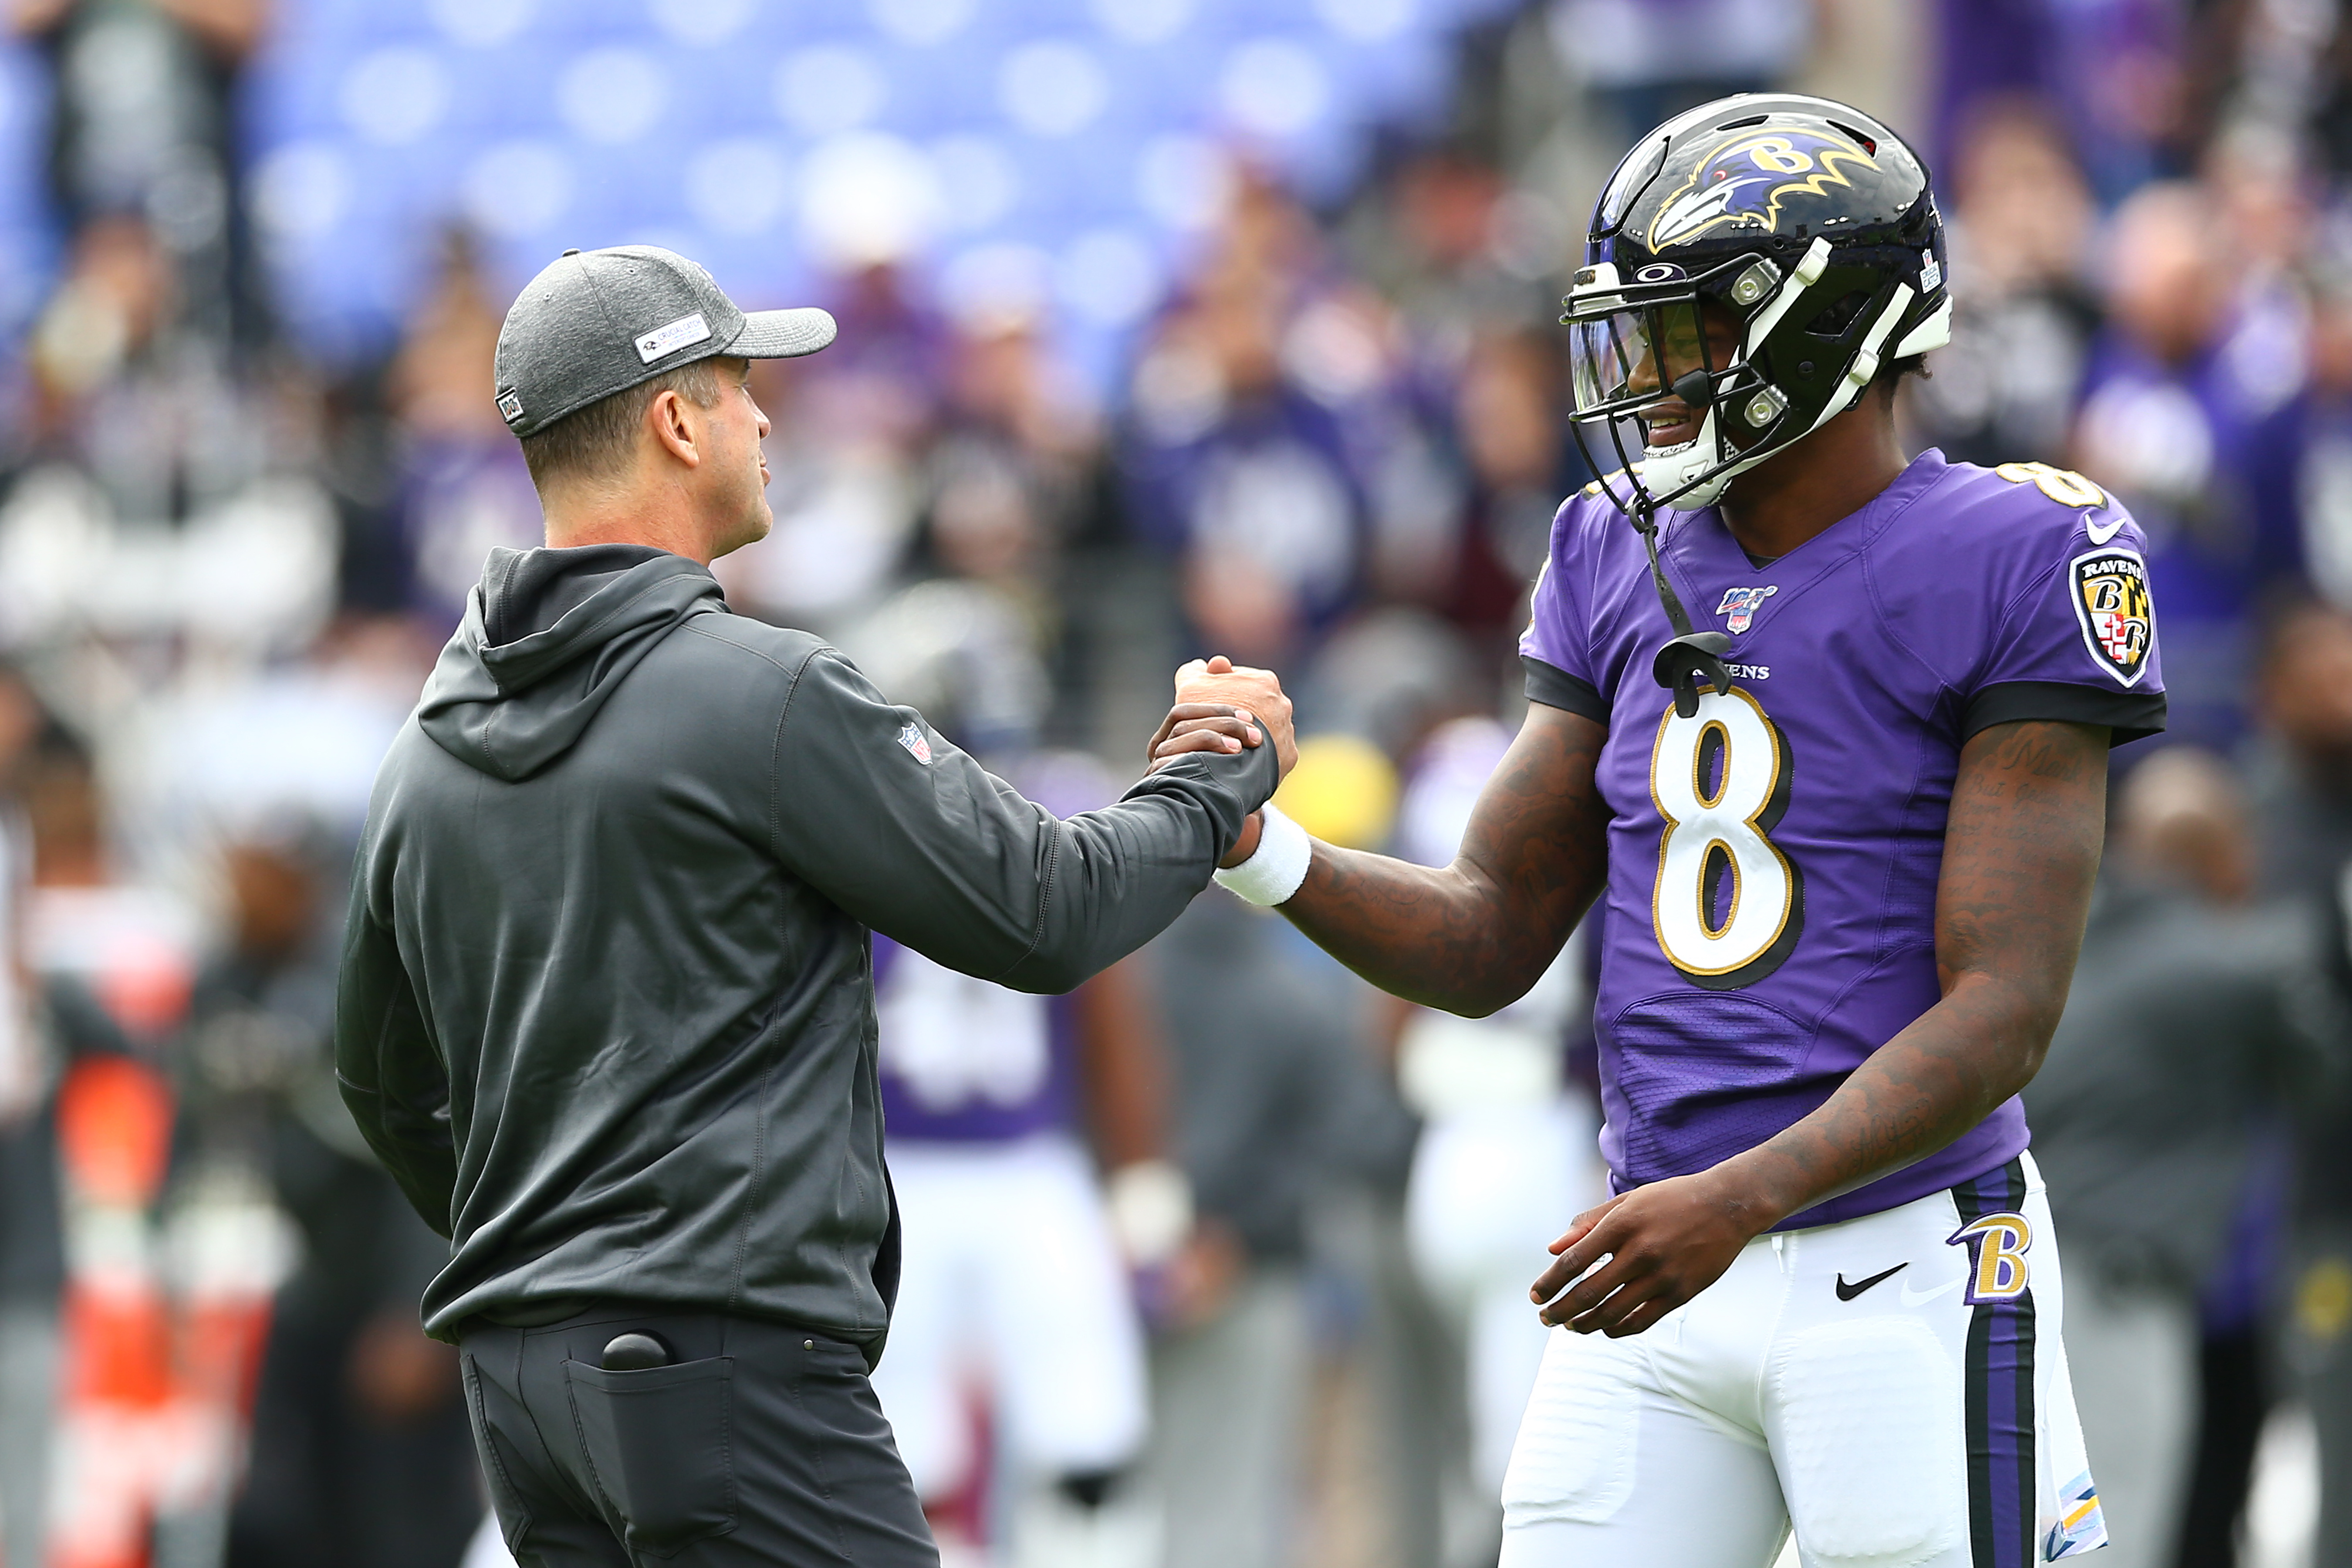 NFL Record: Lamar Jackson Secures $260 Million Deal To Stay With